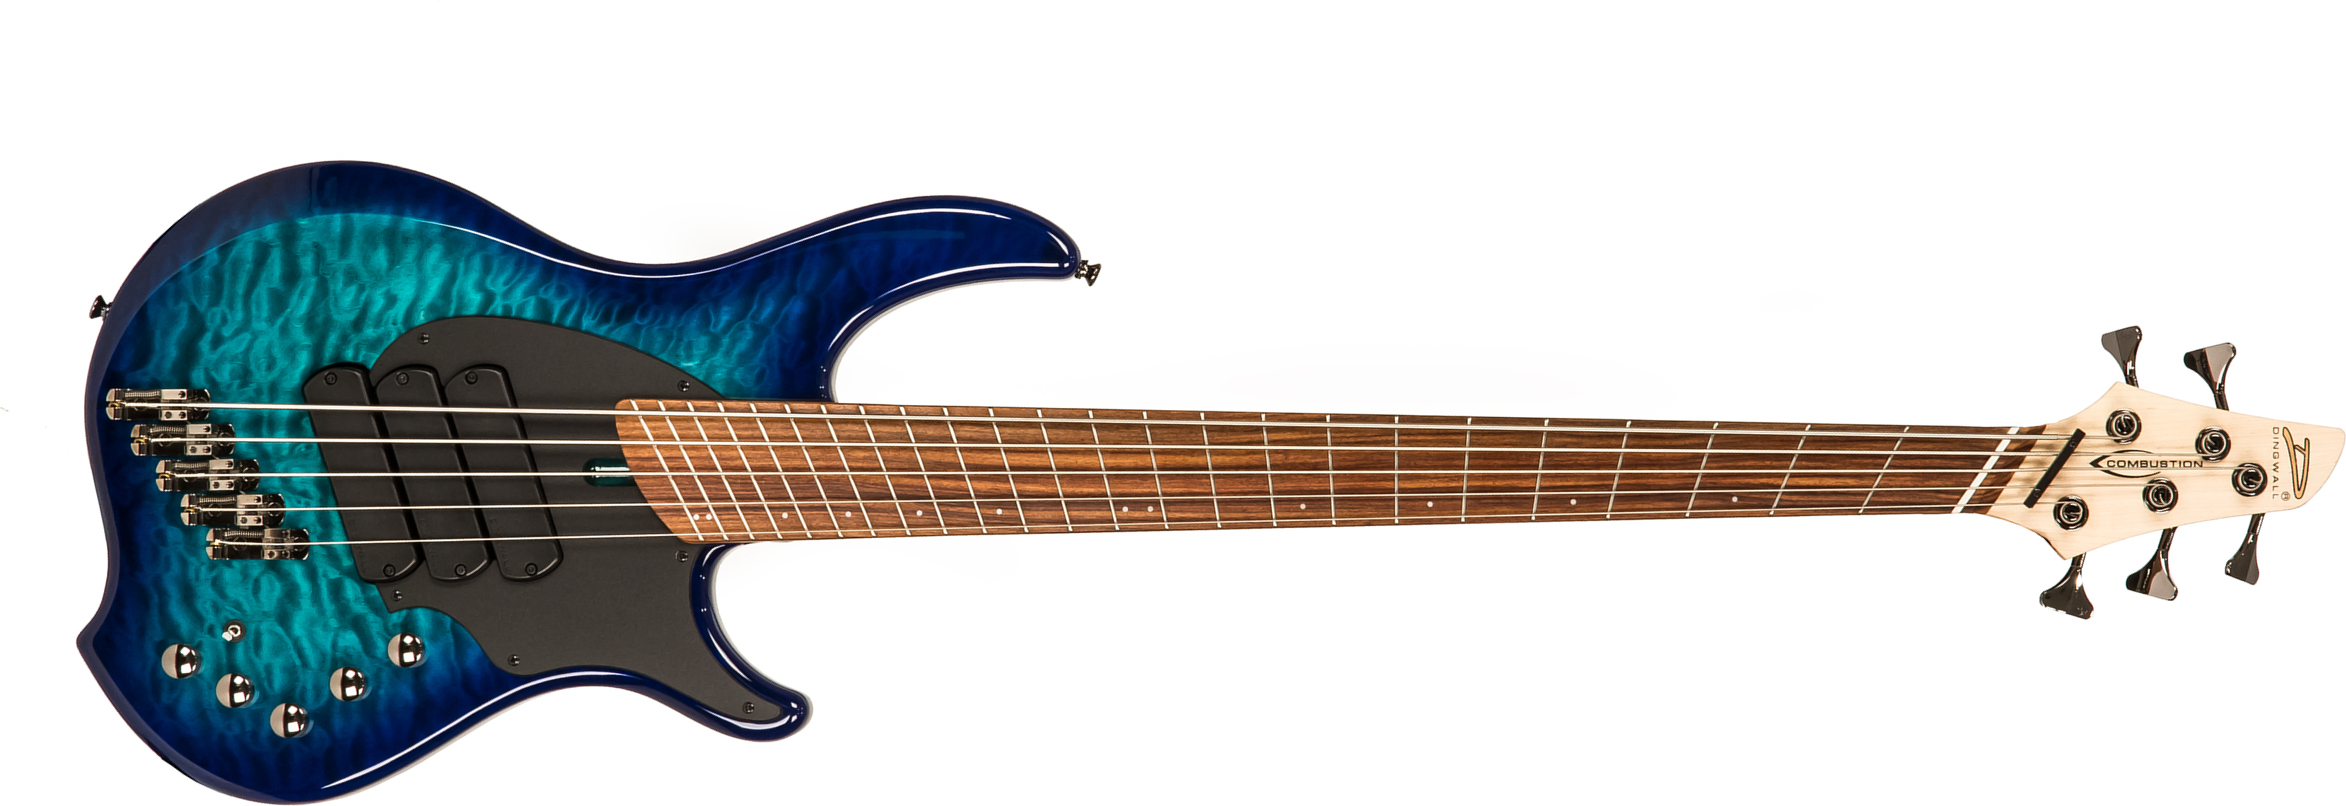 Dingwall Combustion 5 3-pickups Pf +housse - Whalepool Burst - Basse Électrique Solid Body - Main picture